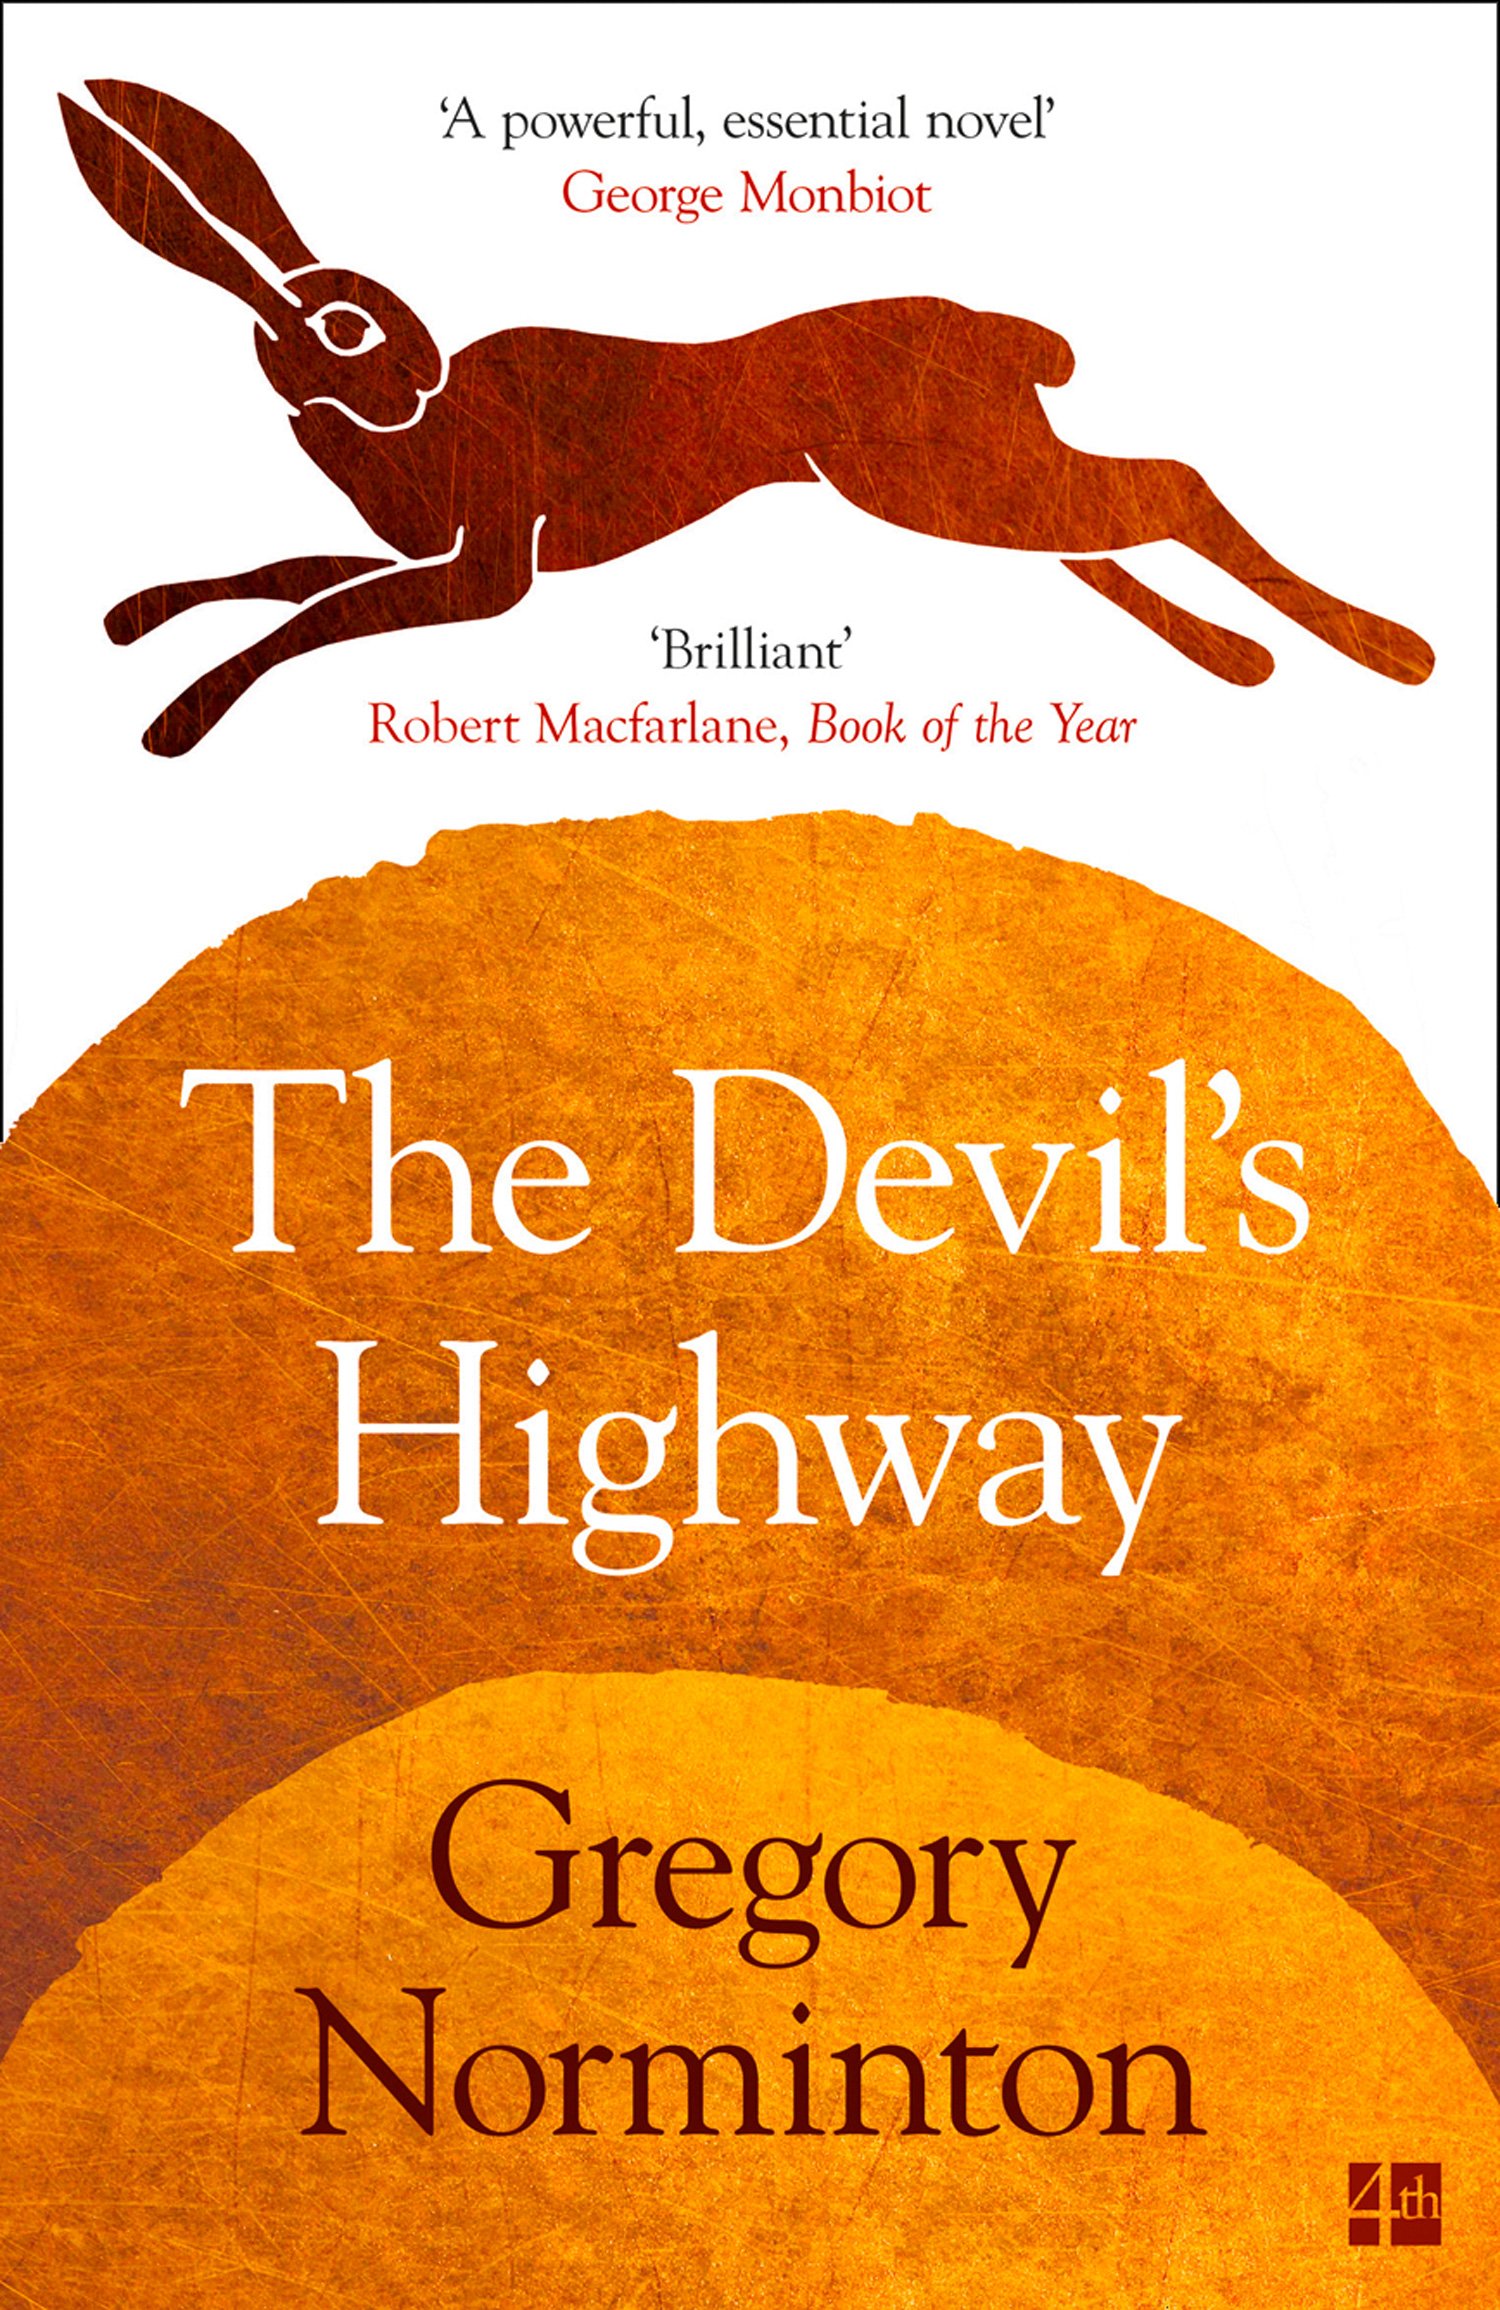 The Devil's Highway | Gregory Norminton image